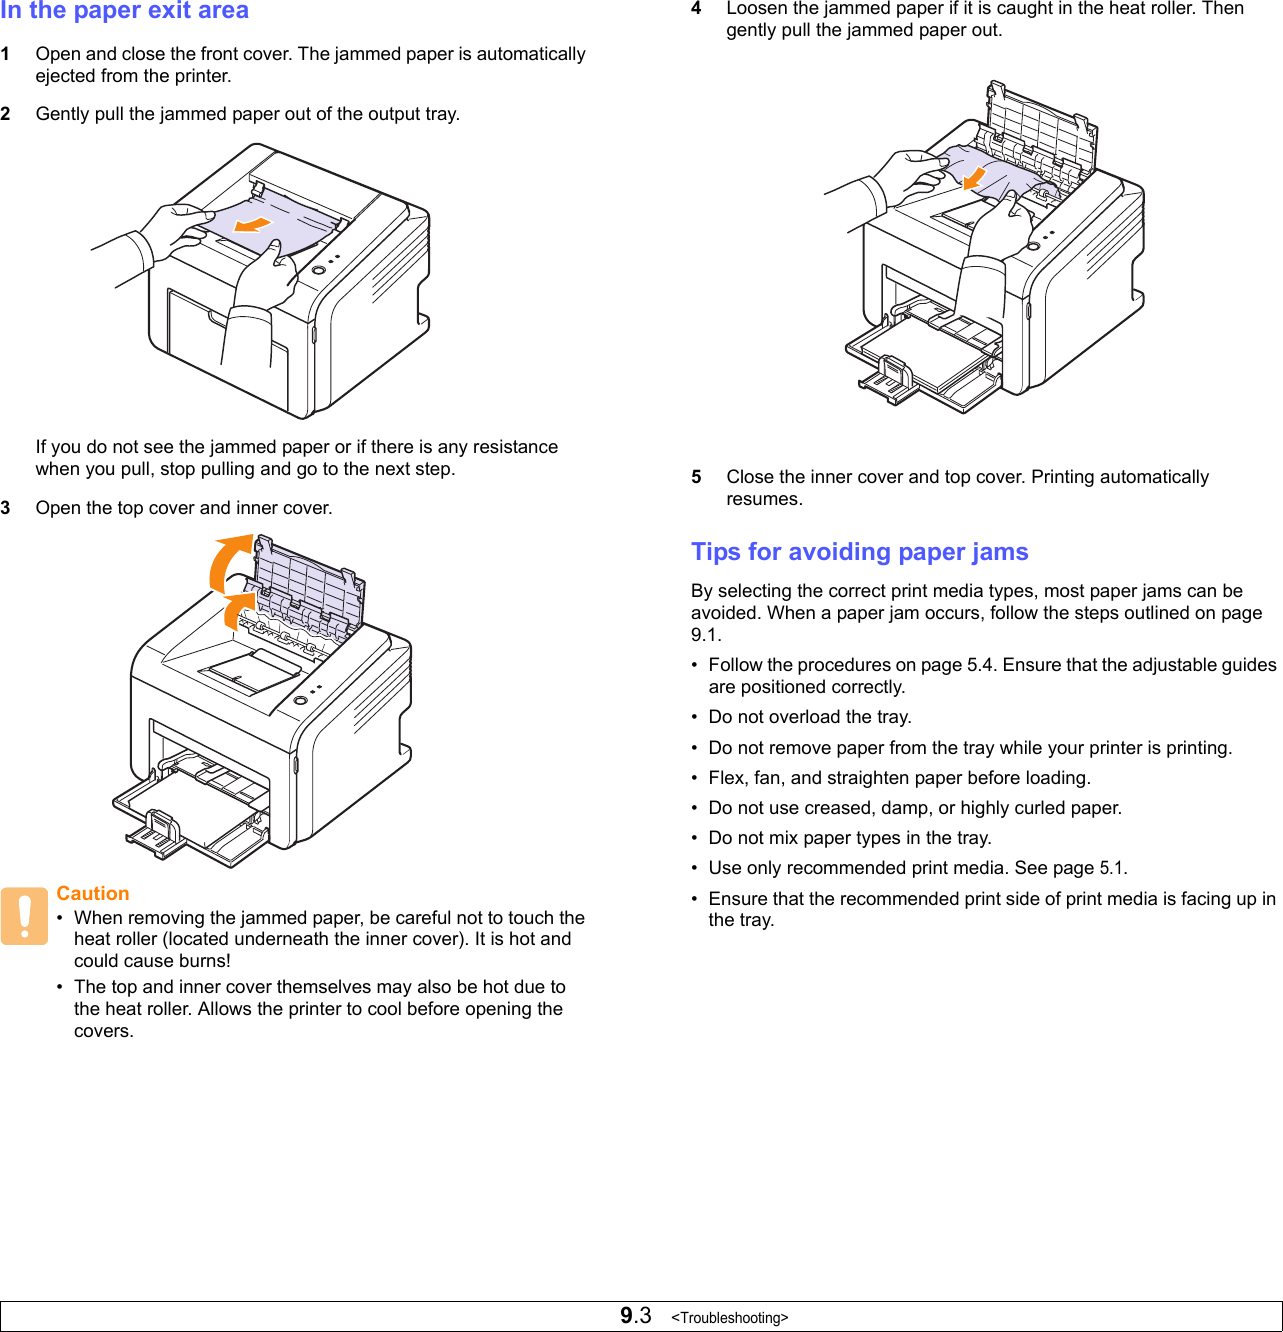 9.3   &lt;Troubleshooting&gt;In the paper exit area1Open and close the front cover. The jammed paper is automatically ejected from the printer. 2Gently pull the jammed paper out of the output tray.If you do not see the jammed paper or if there is any resistance when you pull, stop pulling and go to the next step.3Open the top cover and inner cover.Caution• When removing the jammed paper, be careful not to touch the heat roller (located underneath the inner cover). It is hot and could cause burns!• The top and inner cover themselves may also be hot due to the heat roller. Allows the printer to cool before opening the covers.4Loosen the jammed paper if it is caught in the heat roller. Then gently pull the jammed paper out.5Close the inner cover and top cover. Printing automatically resumes.Tips for avoiding paper jamsBy selecting the correct print media types, most paper jams can be avoided. When a paper jam occurs, follow the steps outlined on page 9.1. • Follow the procedures on page 5.4. Ensure that the adjustable guides are positioned correctly.• Do not overload the tray. • Do not remove paper from the tray while your printer is printing.• Flex, fan, and straighten paper before loading. • Do not use creased, damp, or highly curled paper.• Do not mix paper types in the tray.• Use only recommended print media. See page 5.1.• Ensure that the recommended print side of print media is facing up in the tray.